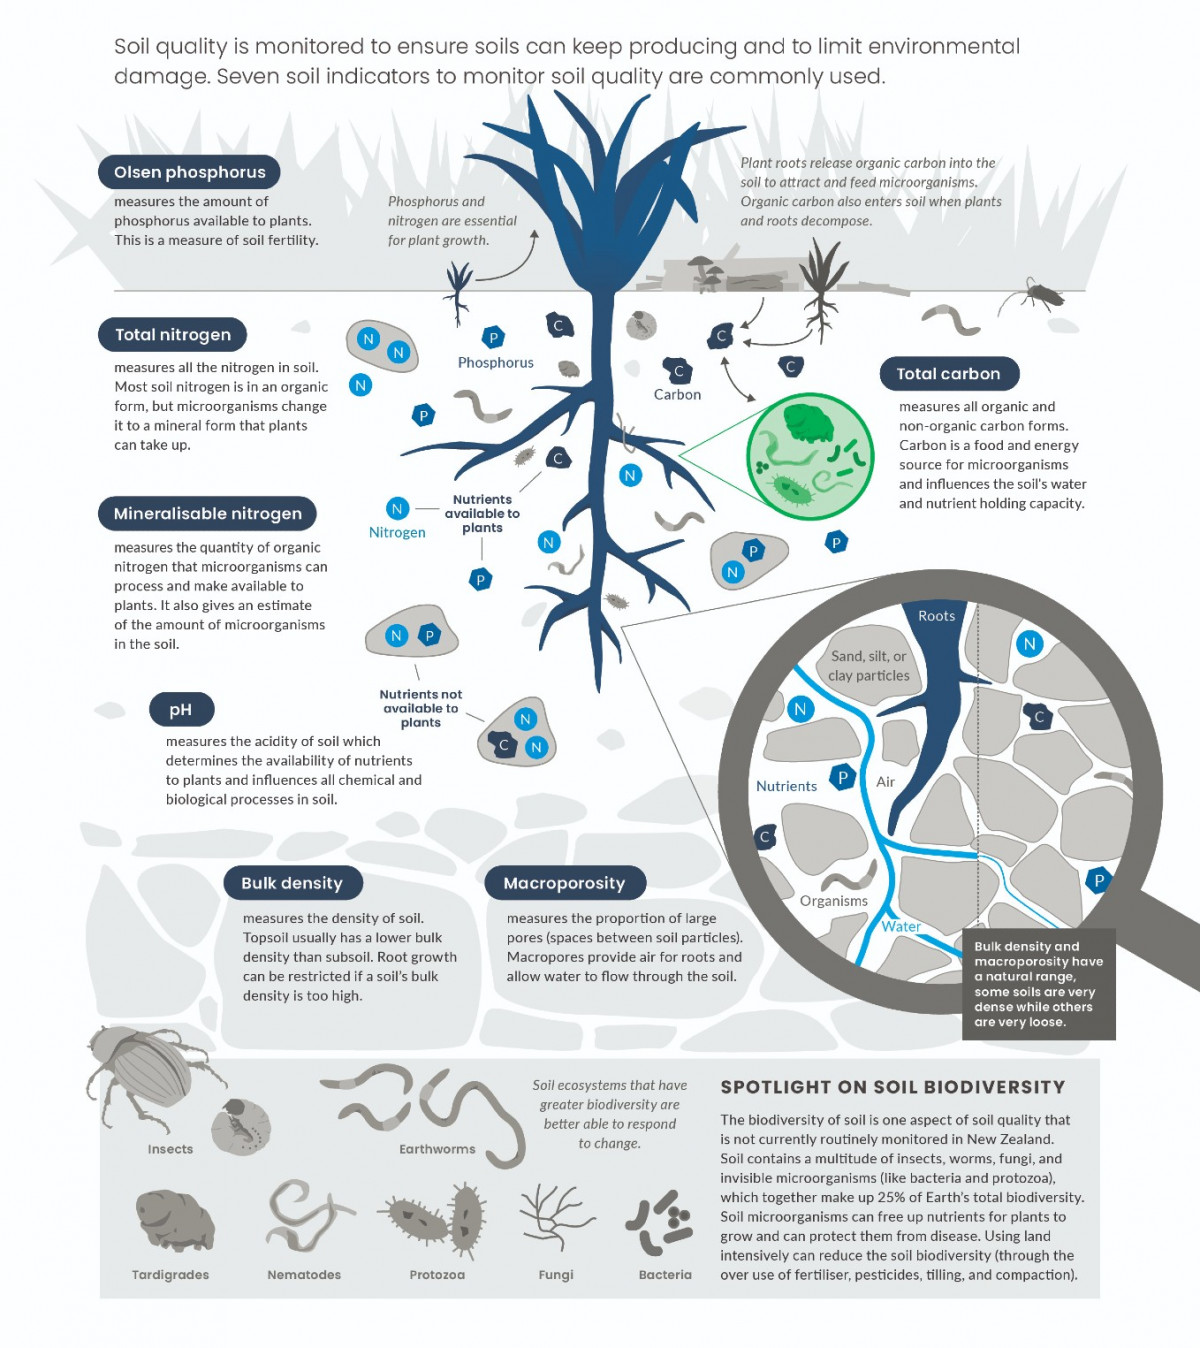 A plant is pictured with the grass above and soil below included to show what is occurring below the surface near its roots. Towards the bottom, there is a feature on insects, worms, fungi and microorganisms. Infographic.